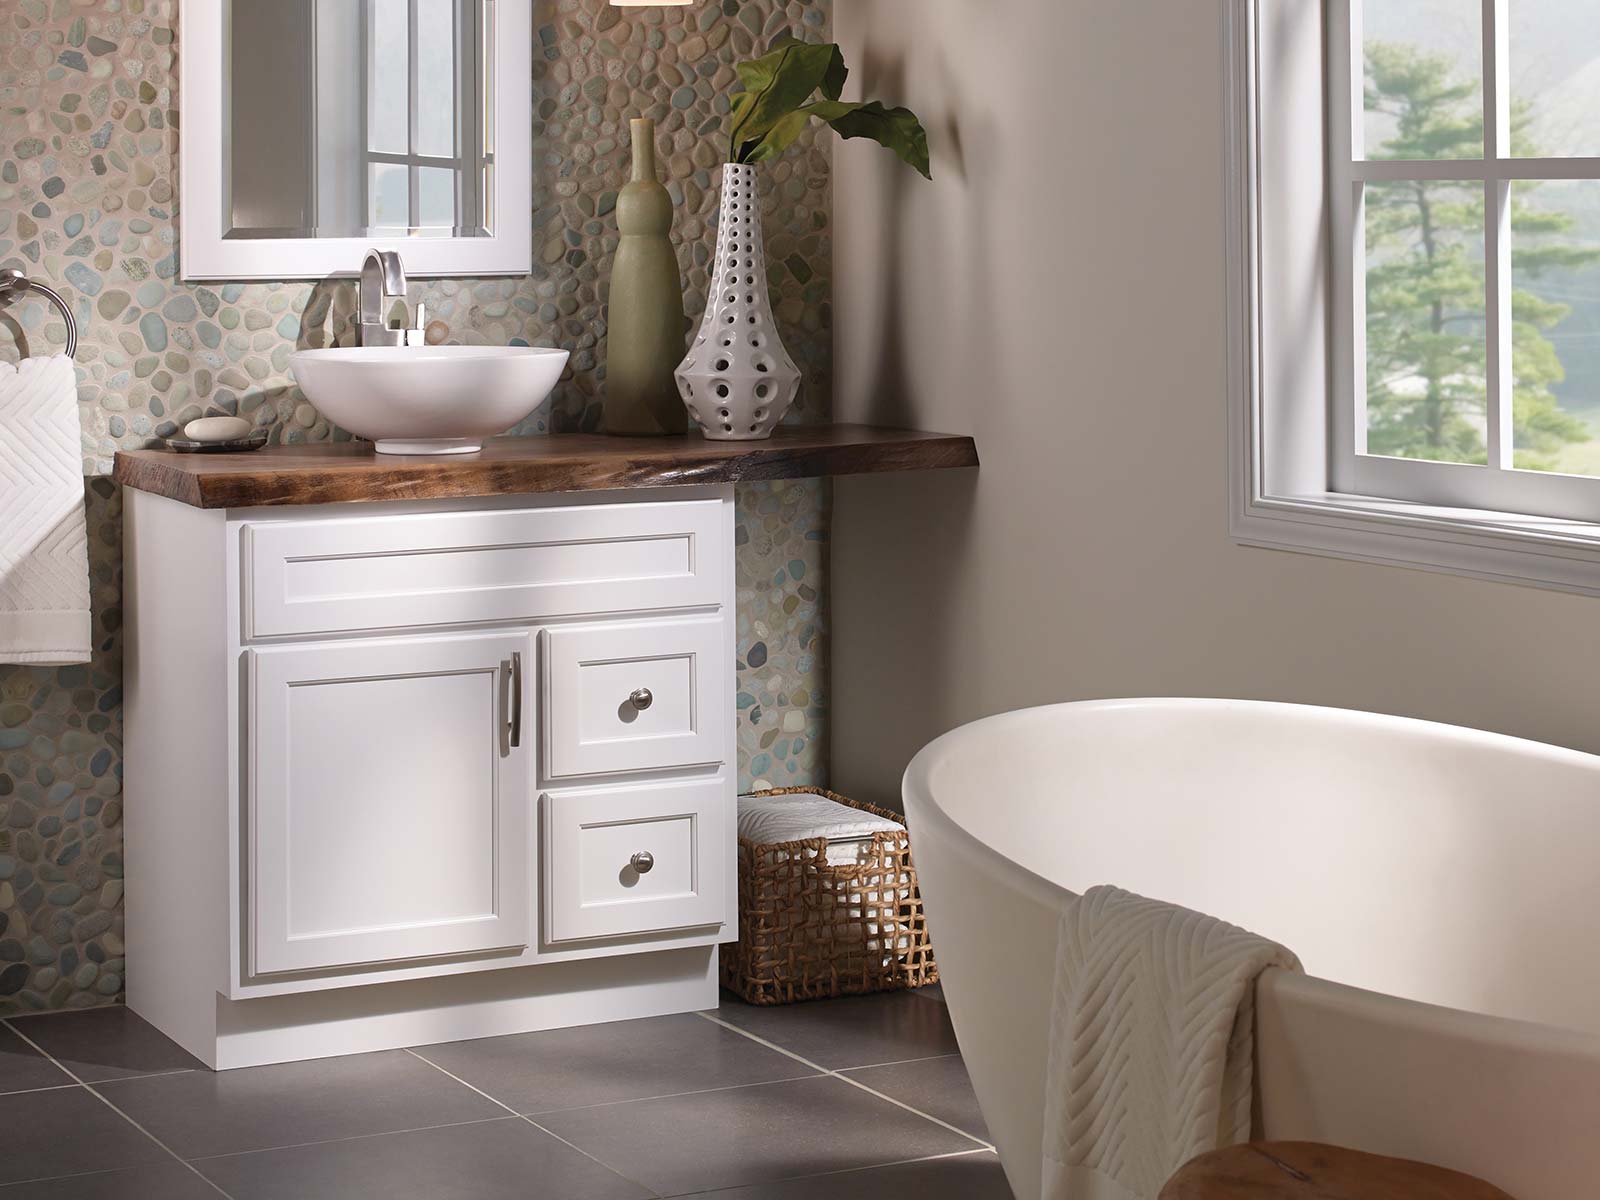 Tips & Tricks for Remodeling a Small Bathroom